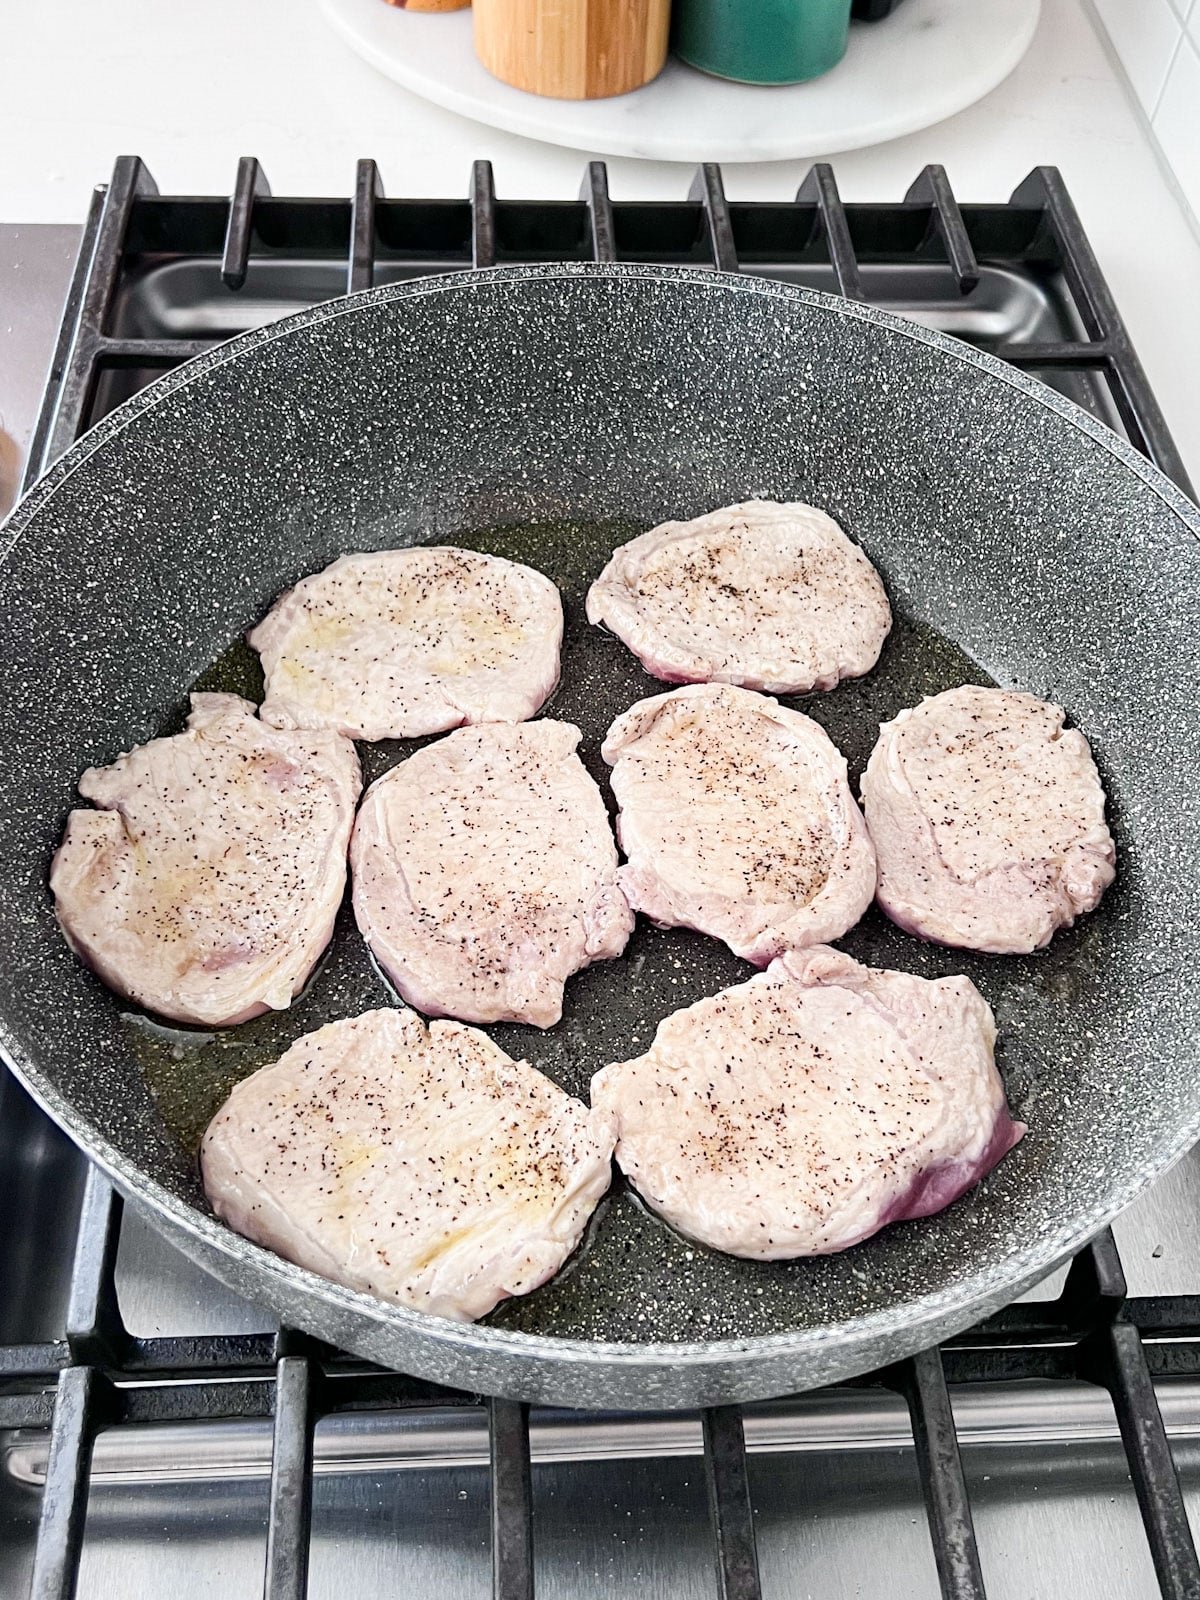 Seasoned thin pork chops browning in a large skillet on the stove.